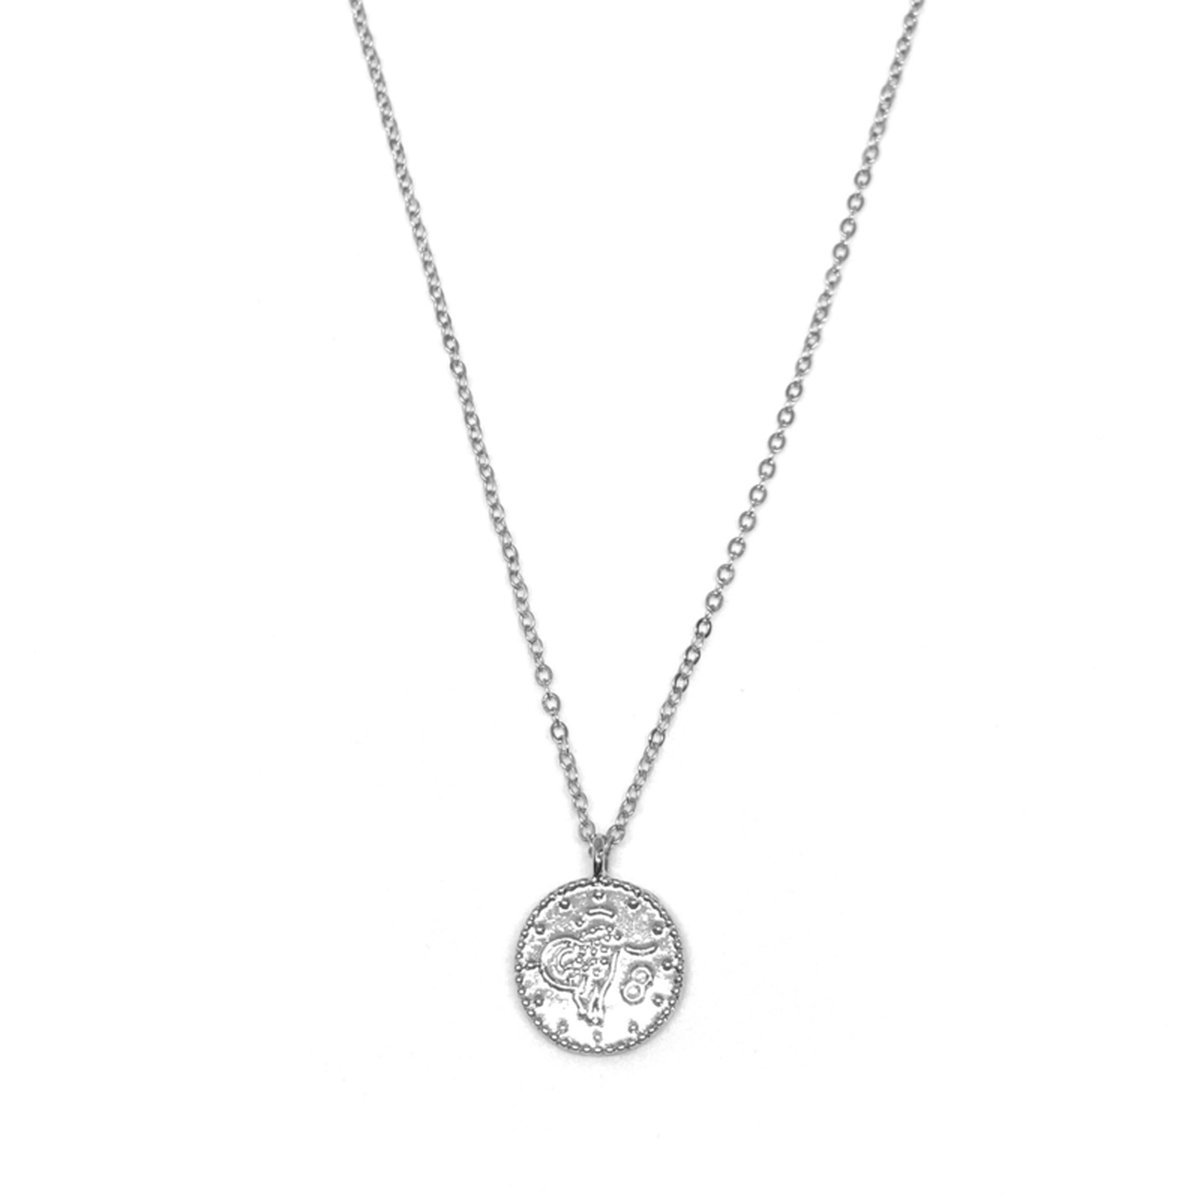 DQ coin necklace - silver